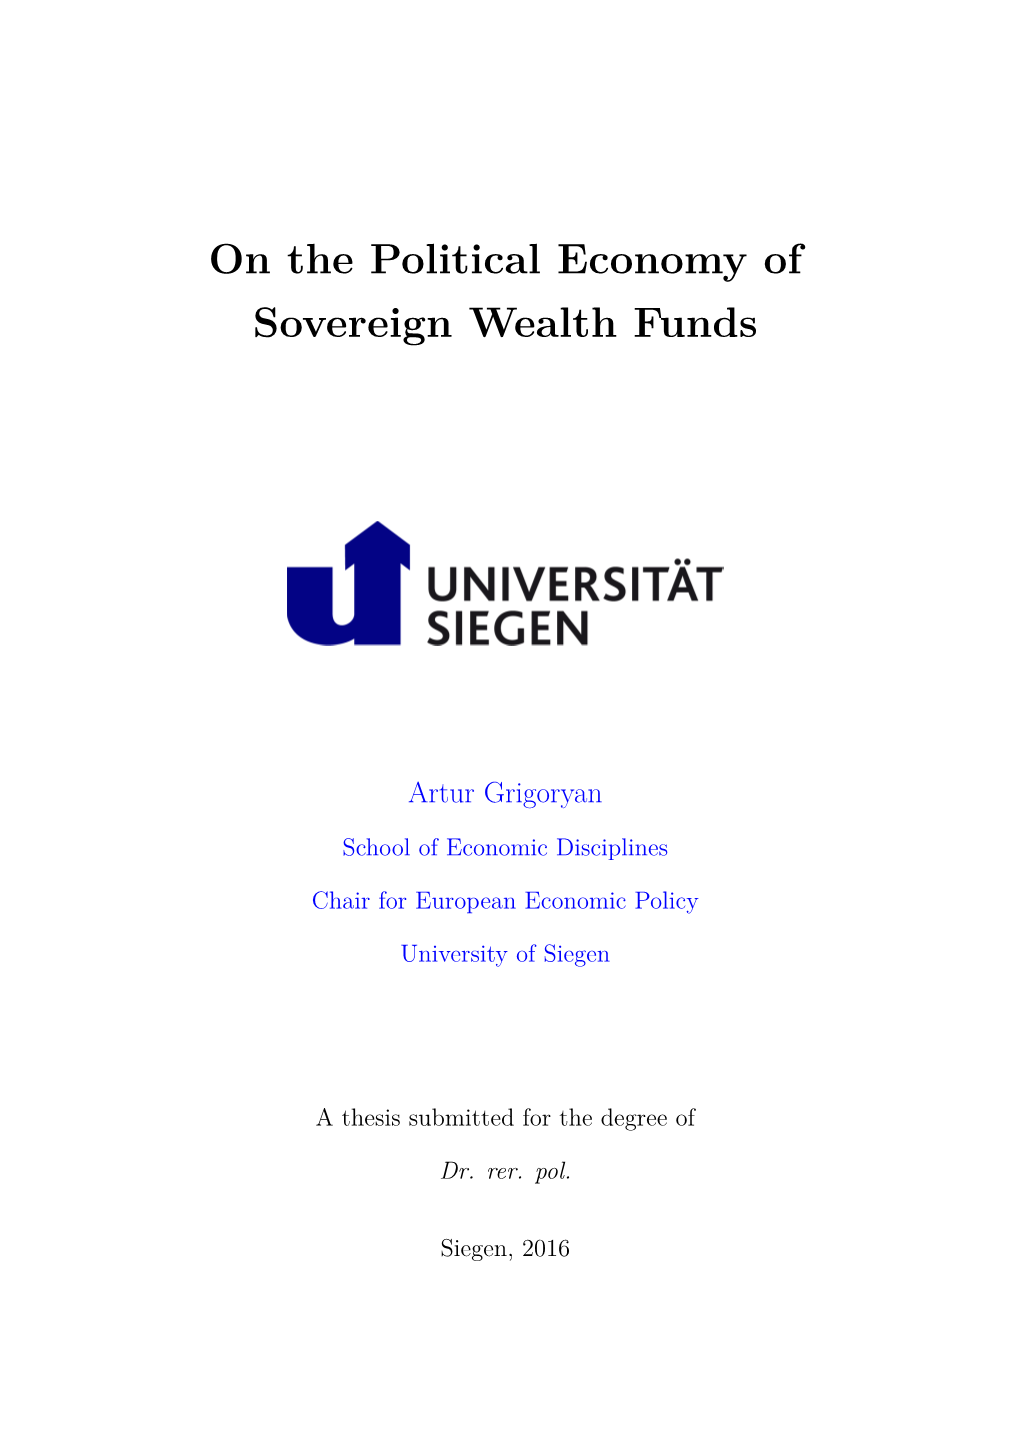 On the Political Economy of Sovereign Wealth Funds